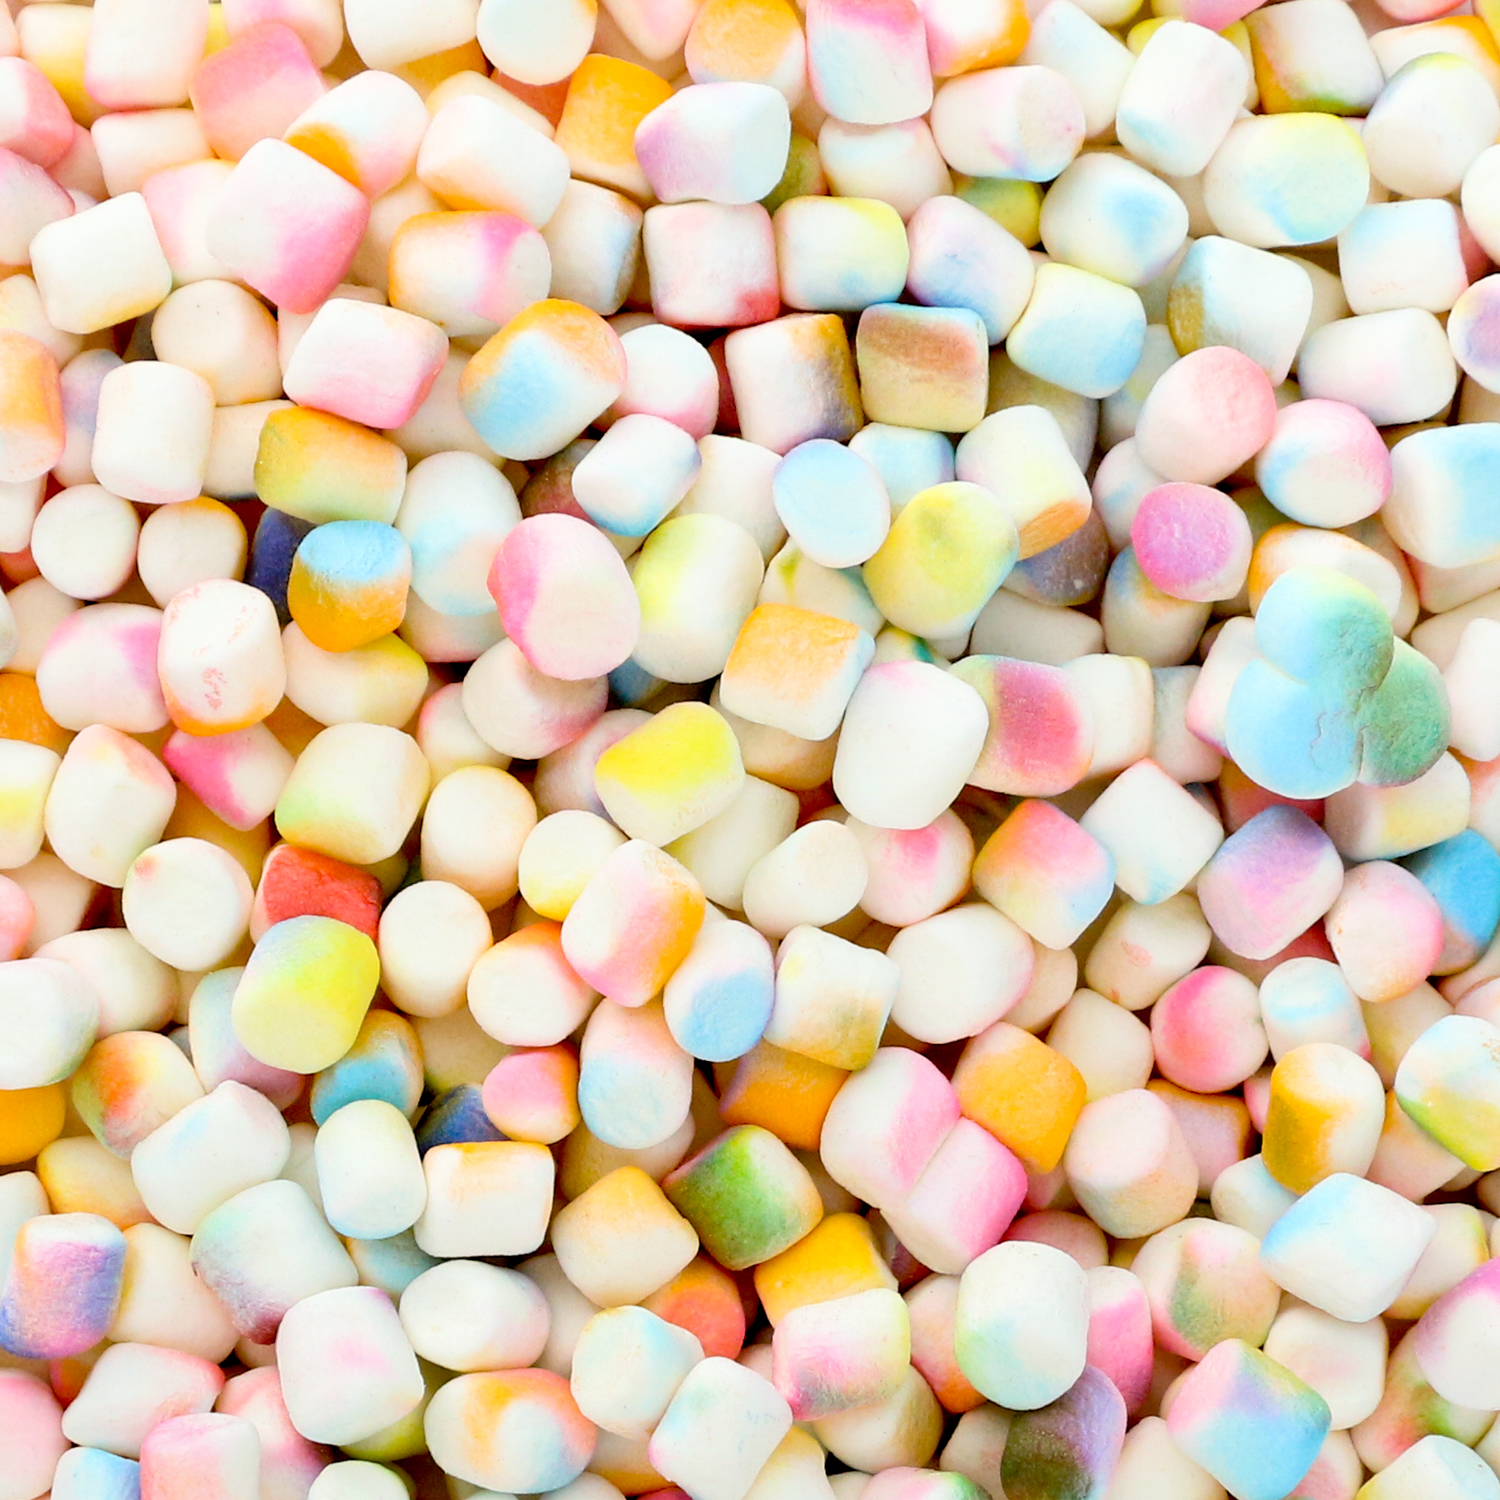 Make It - Gradient Marshmallows and Colorful Cocoa - A Kailo Chic Life